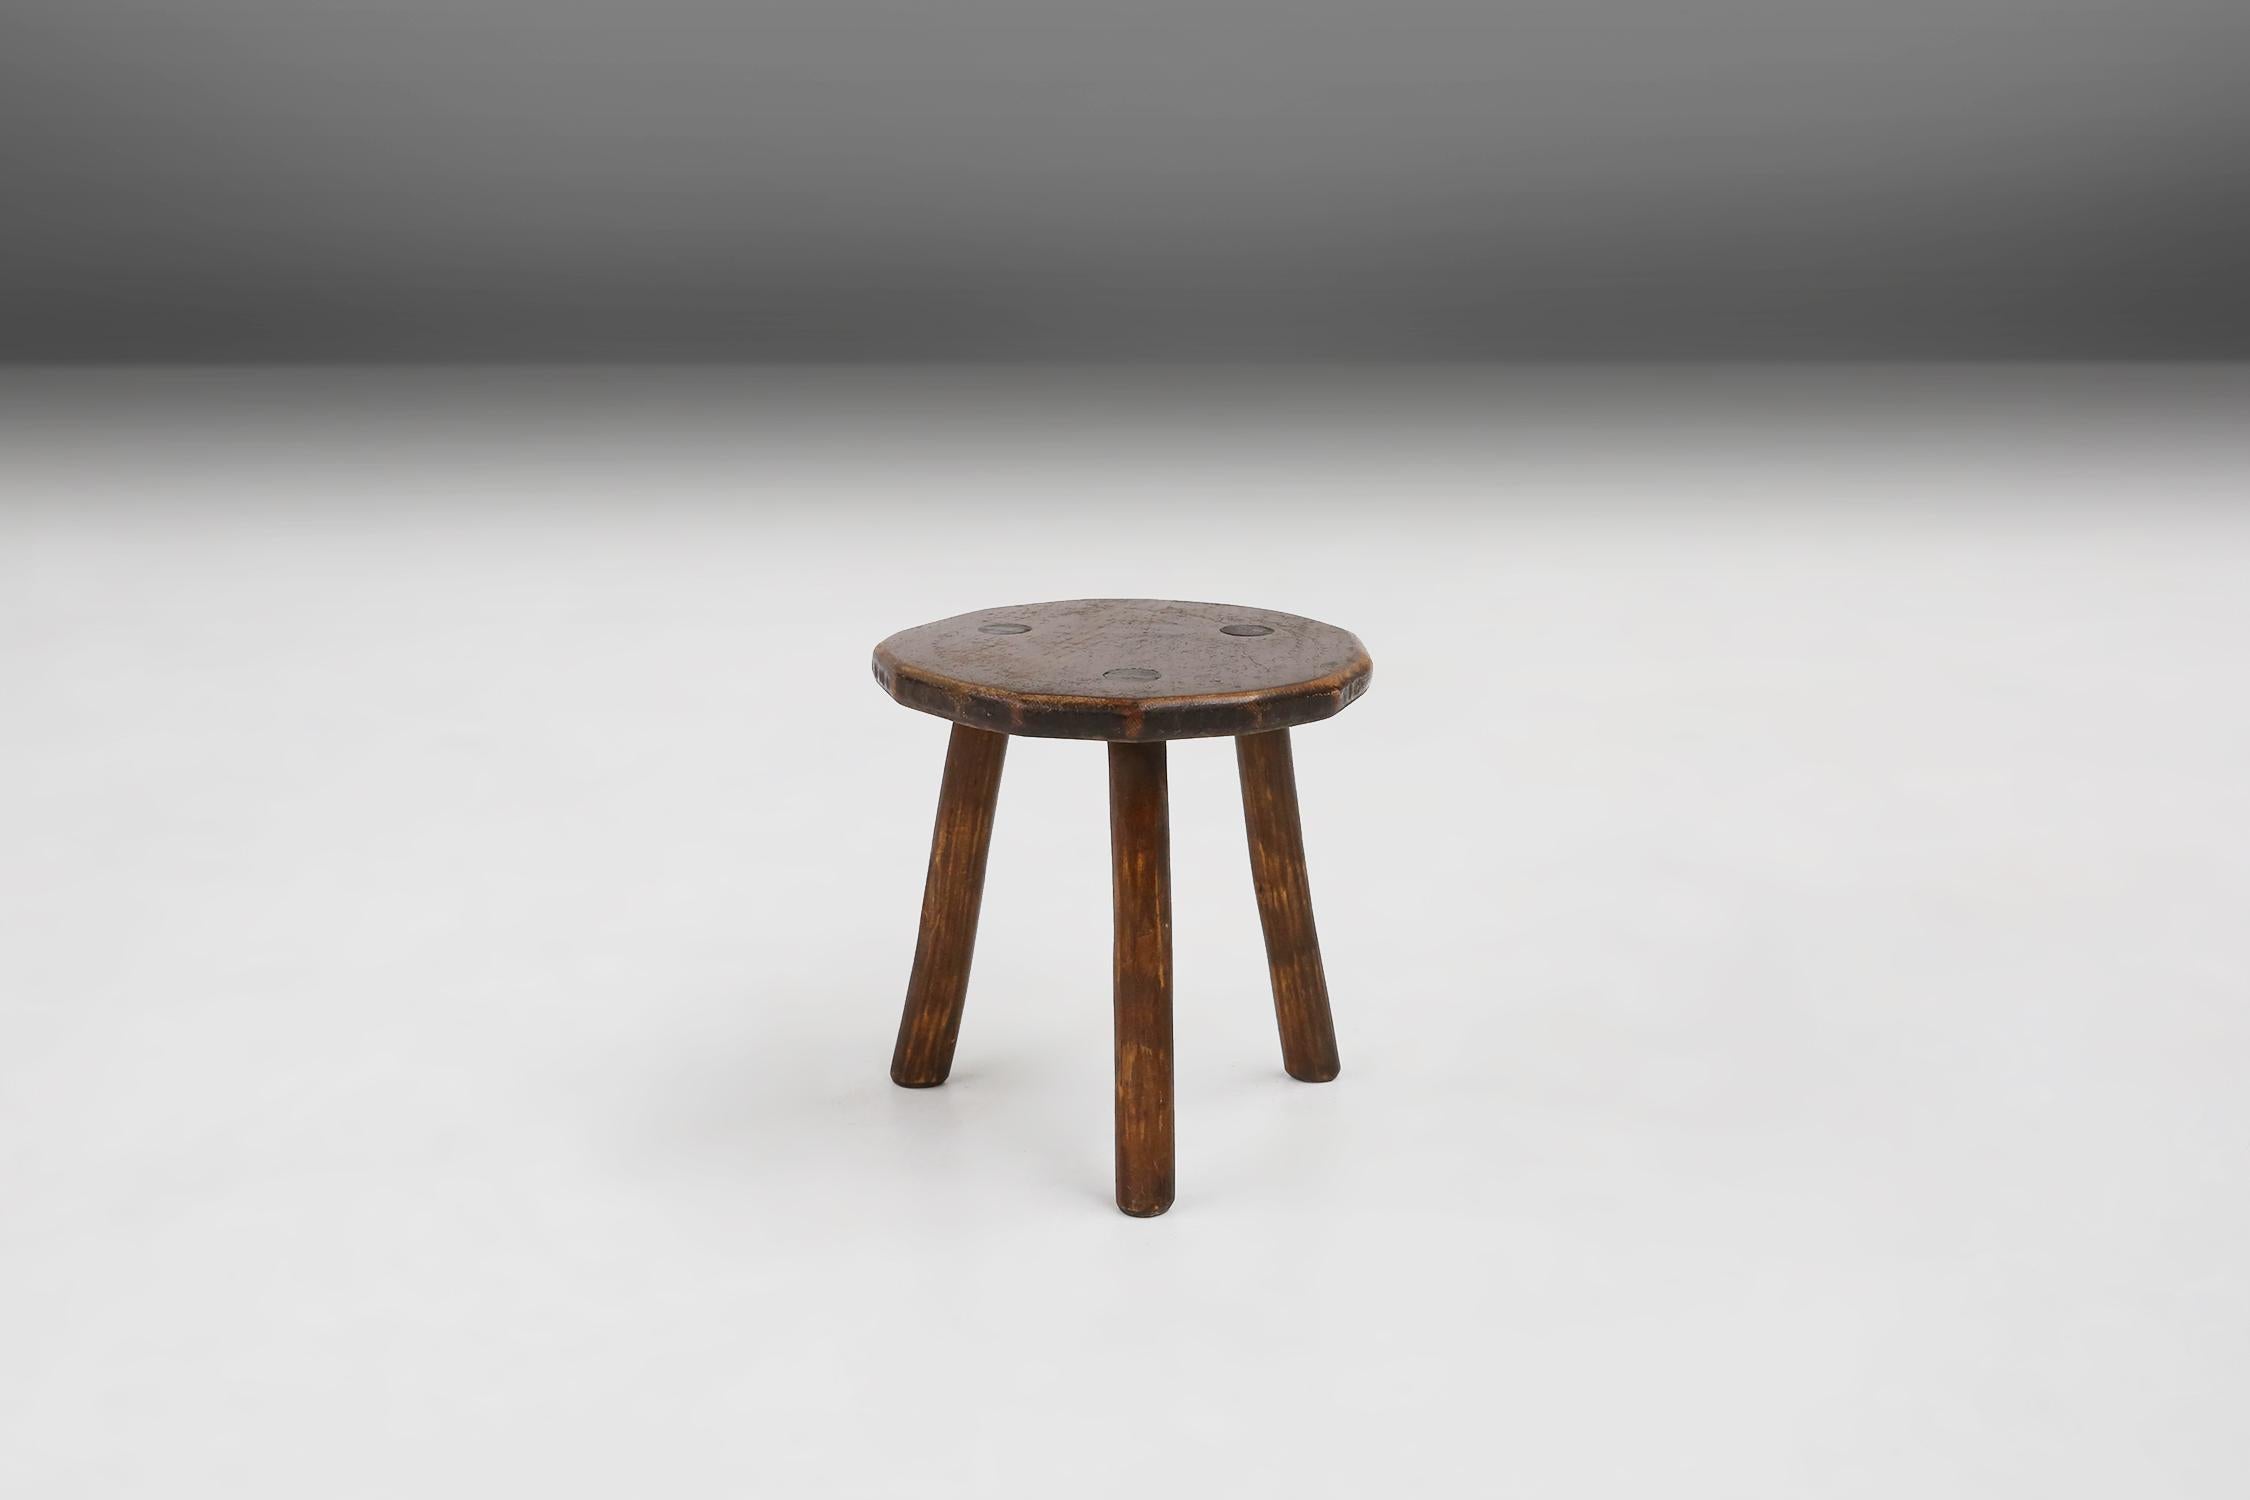 Round rustic wooden stool with great patina made around 1900.
Some nice details on the top where the legs are attached to the seat.

This rustic round stool is a simple and charming piece of furniture that can add character and warmth to any